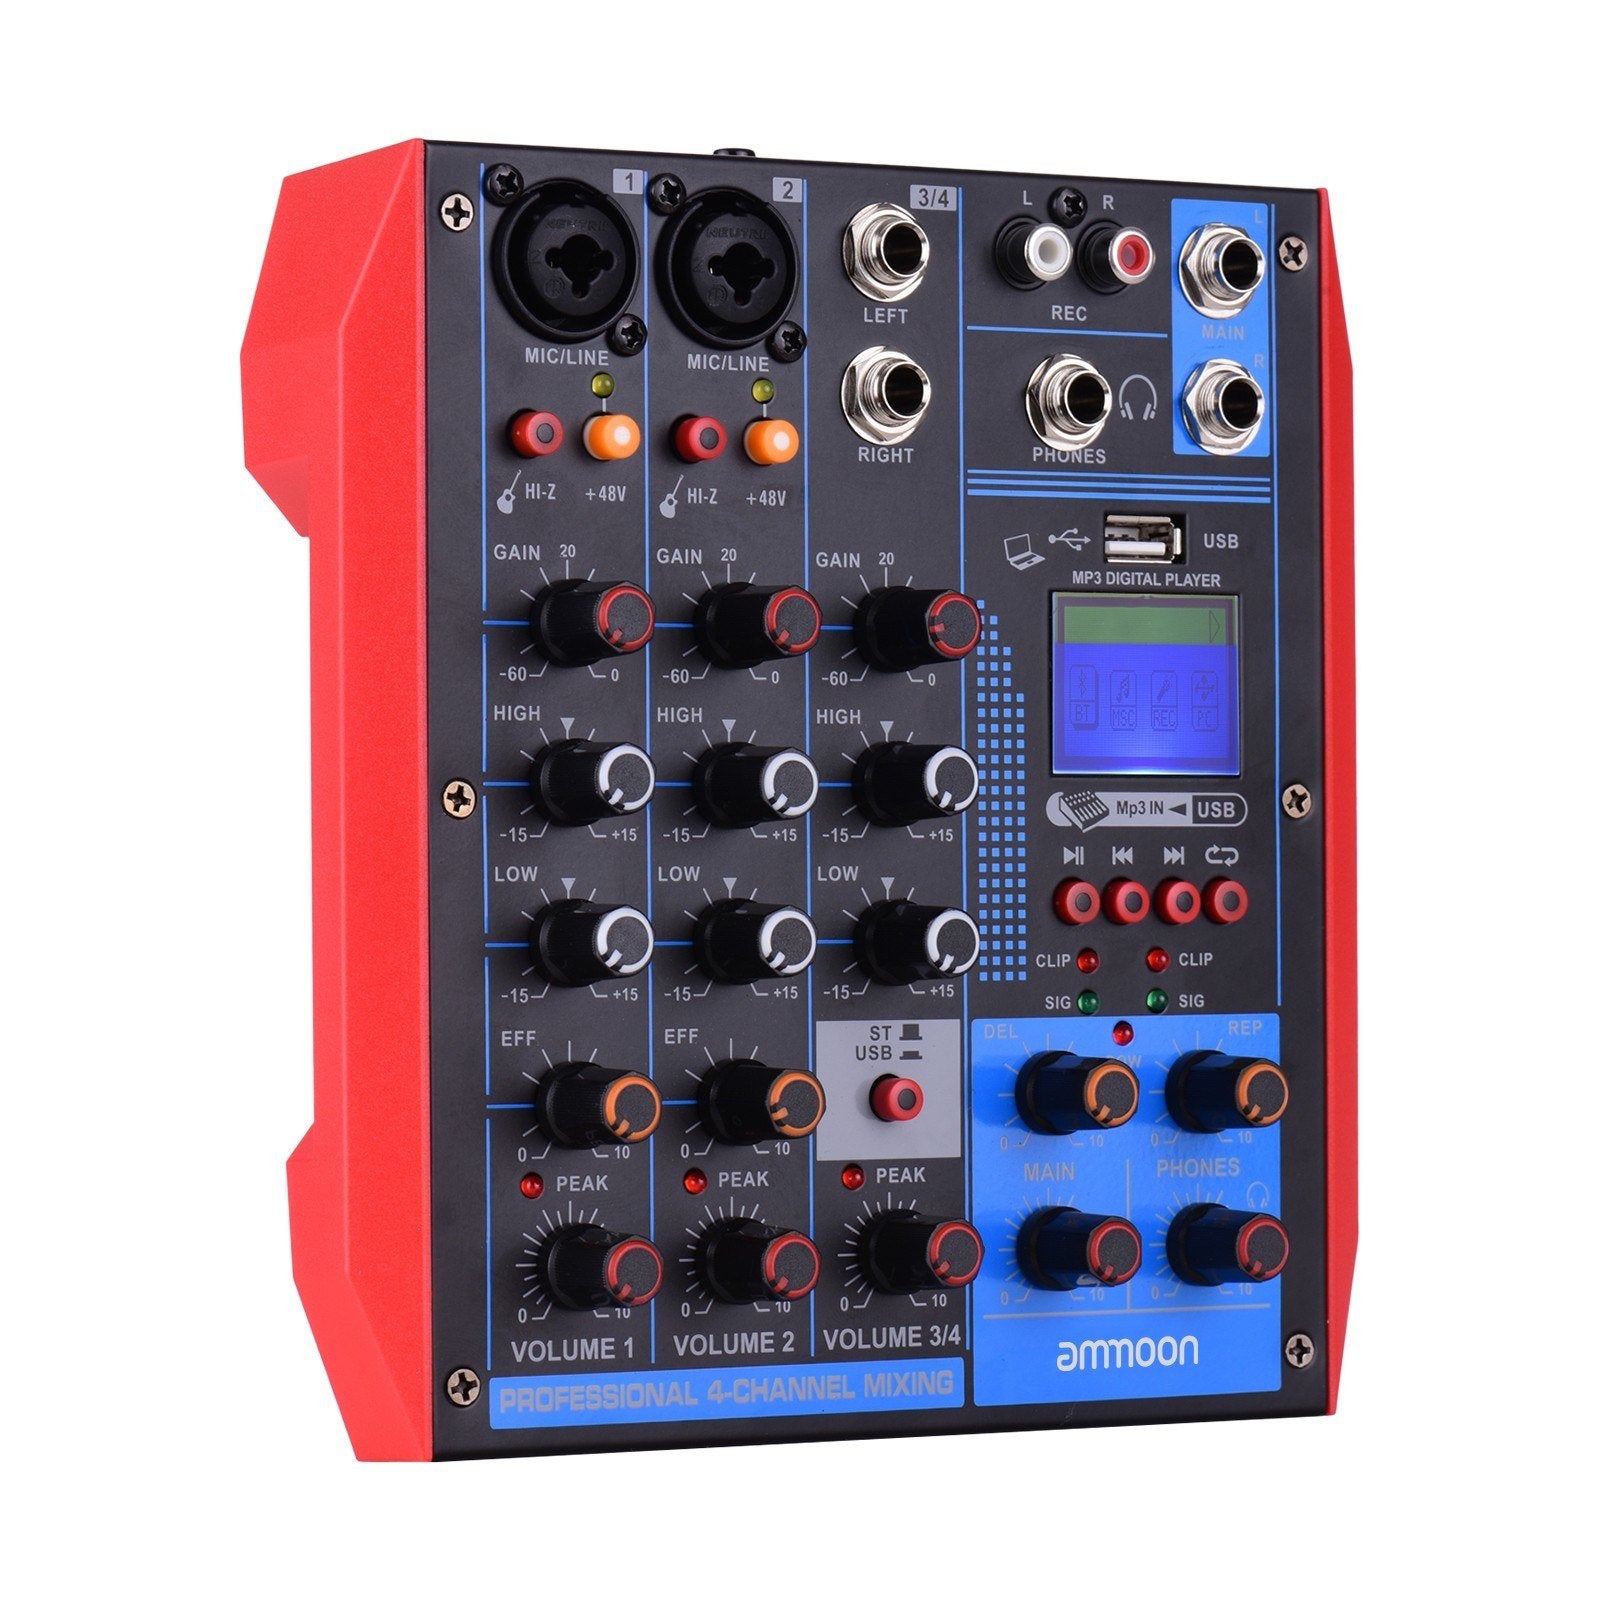 Portable 4-Channel Mixing Console Digital Audio Mixer